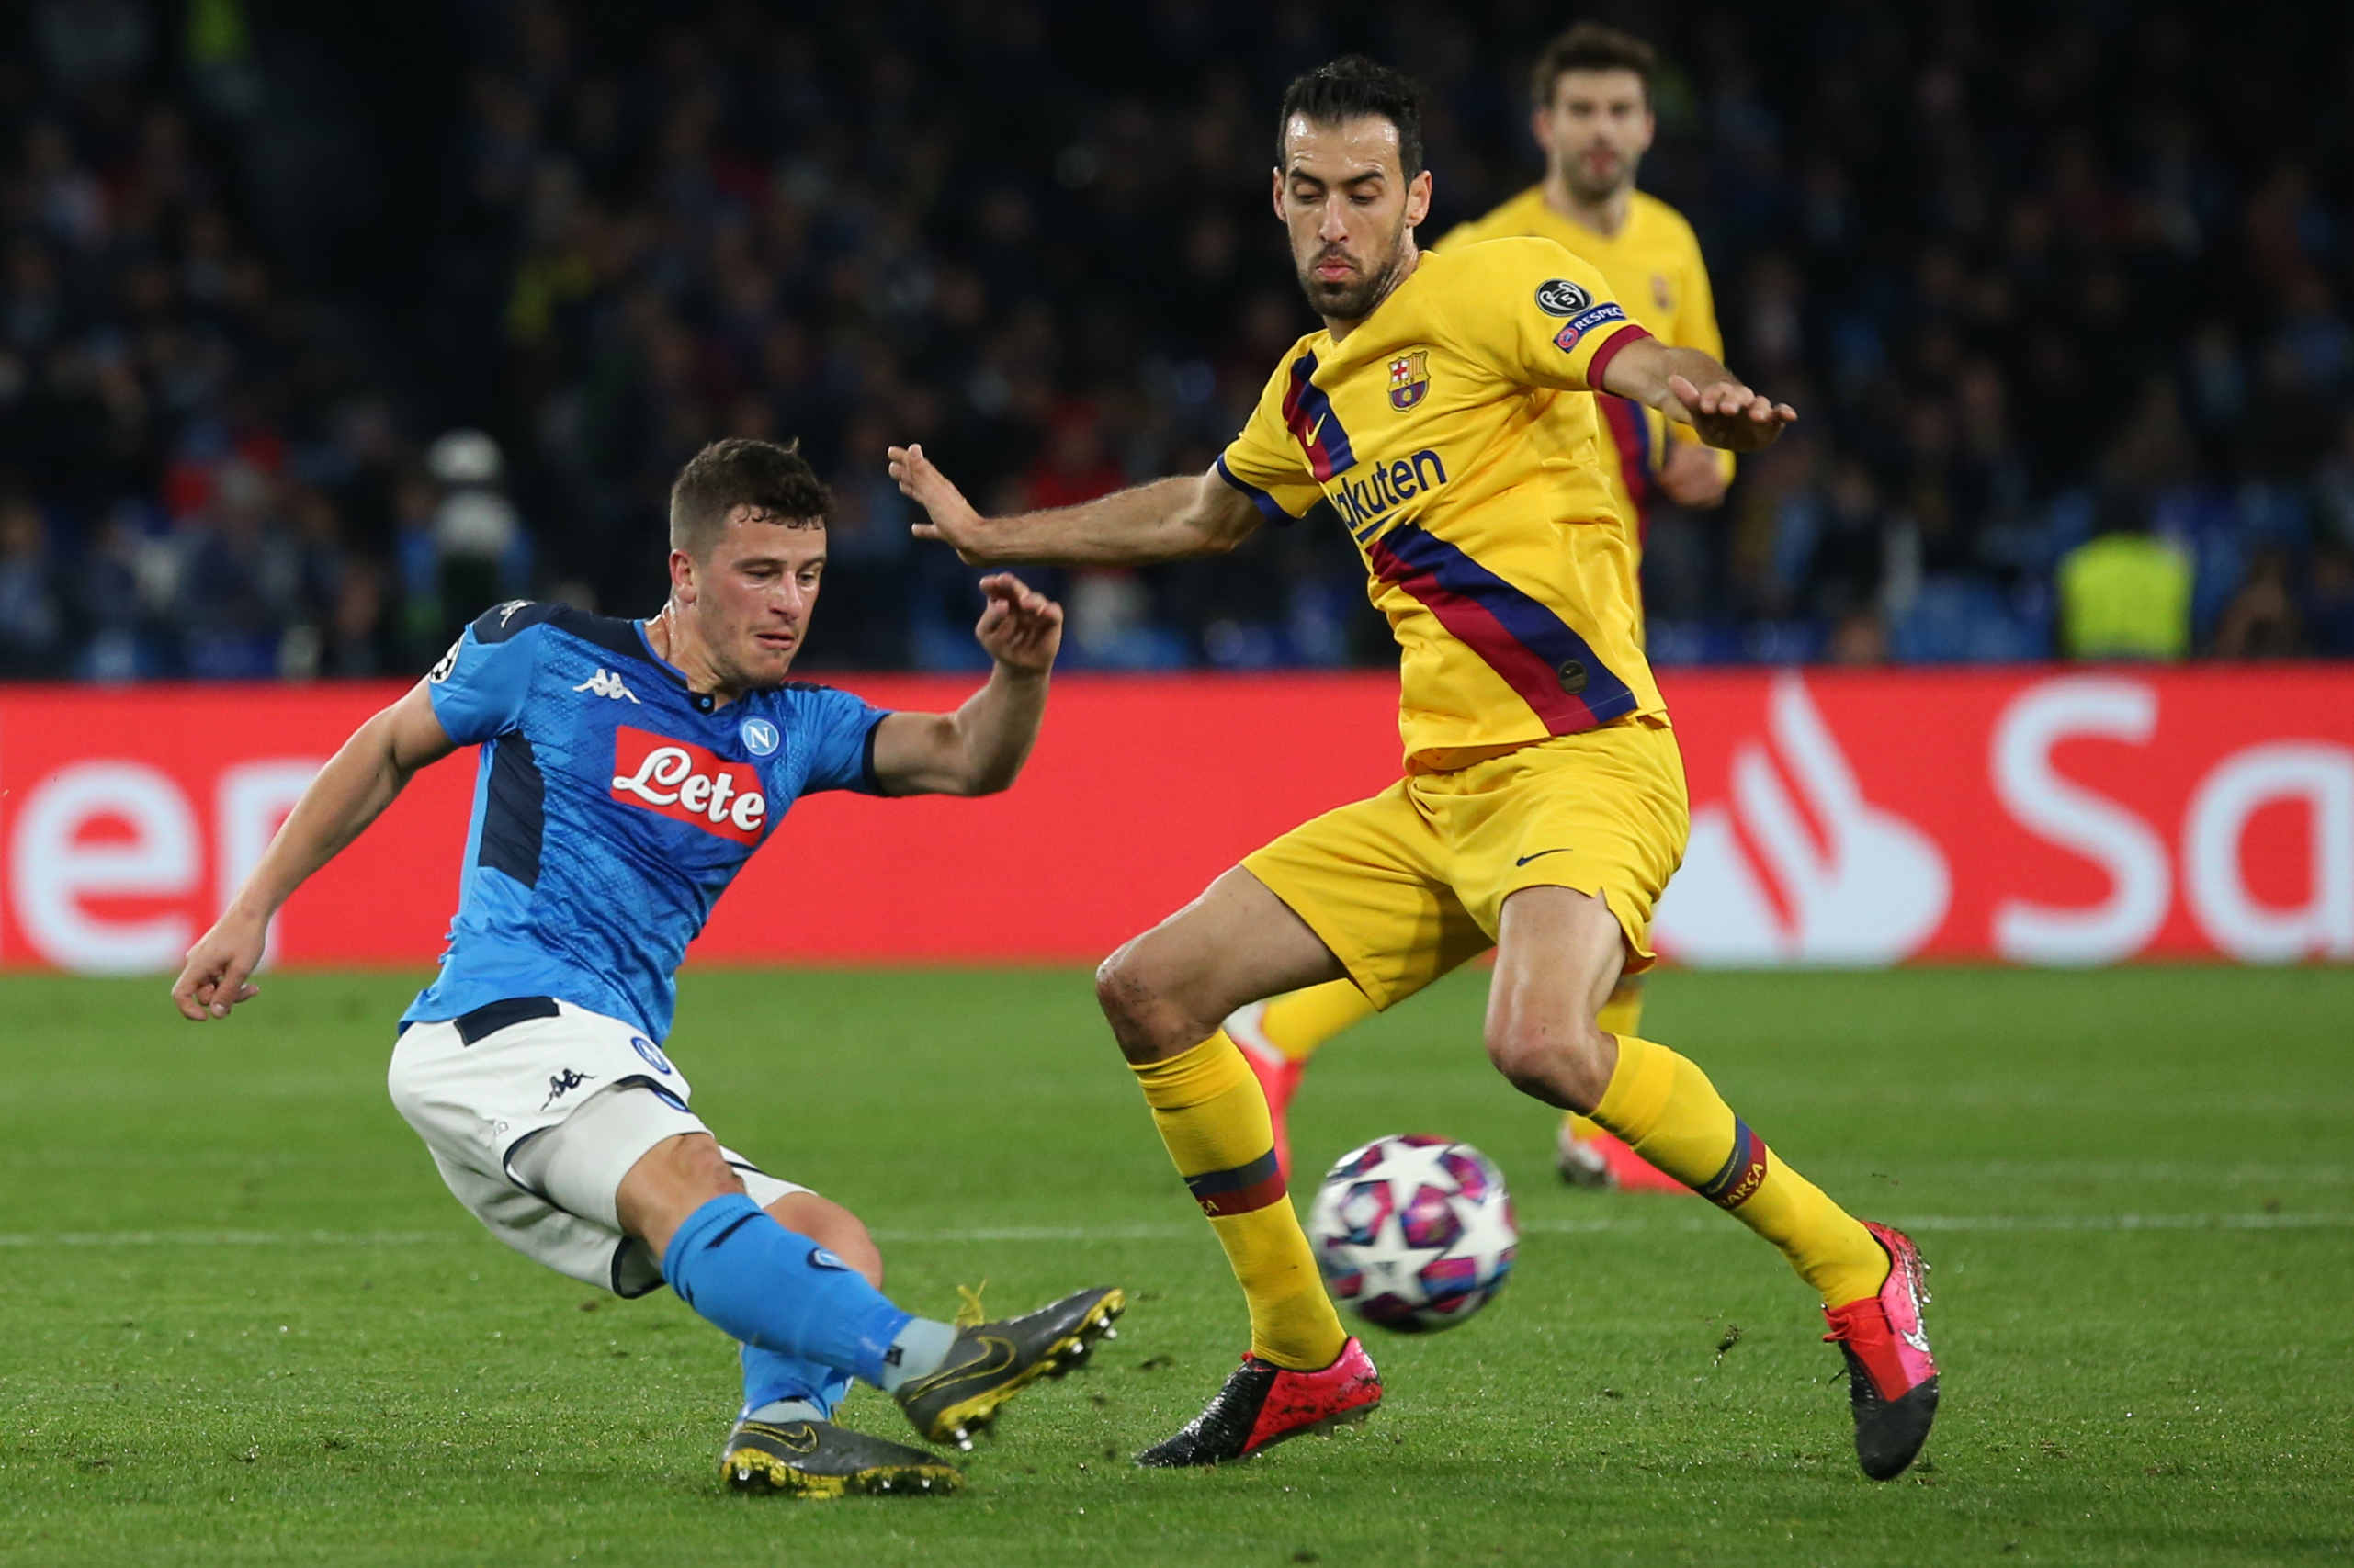 Napoli's German midfiedler Diego Demme (L) vies for the ball with Barcelona's Spanish midfielder Sergio Busquets  during the UEFA Champions League round of 16 first-leg football match between SSC Napoli and FC Barcelona at the San Paolo Stadium in Naples on February 25, 2020. (Photo by CARLO HERMANN / AFP) (Photo by CARLO HERMANN/AFP via Getty Images)